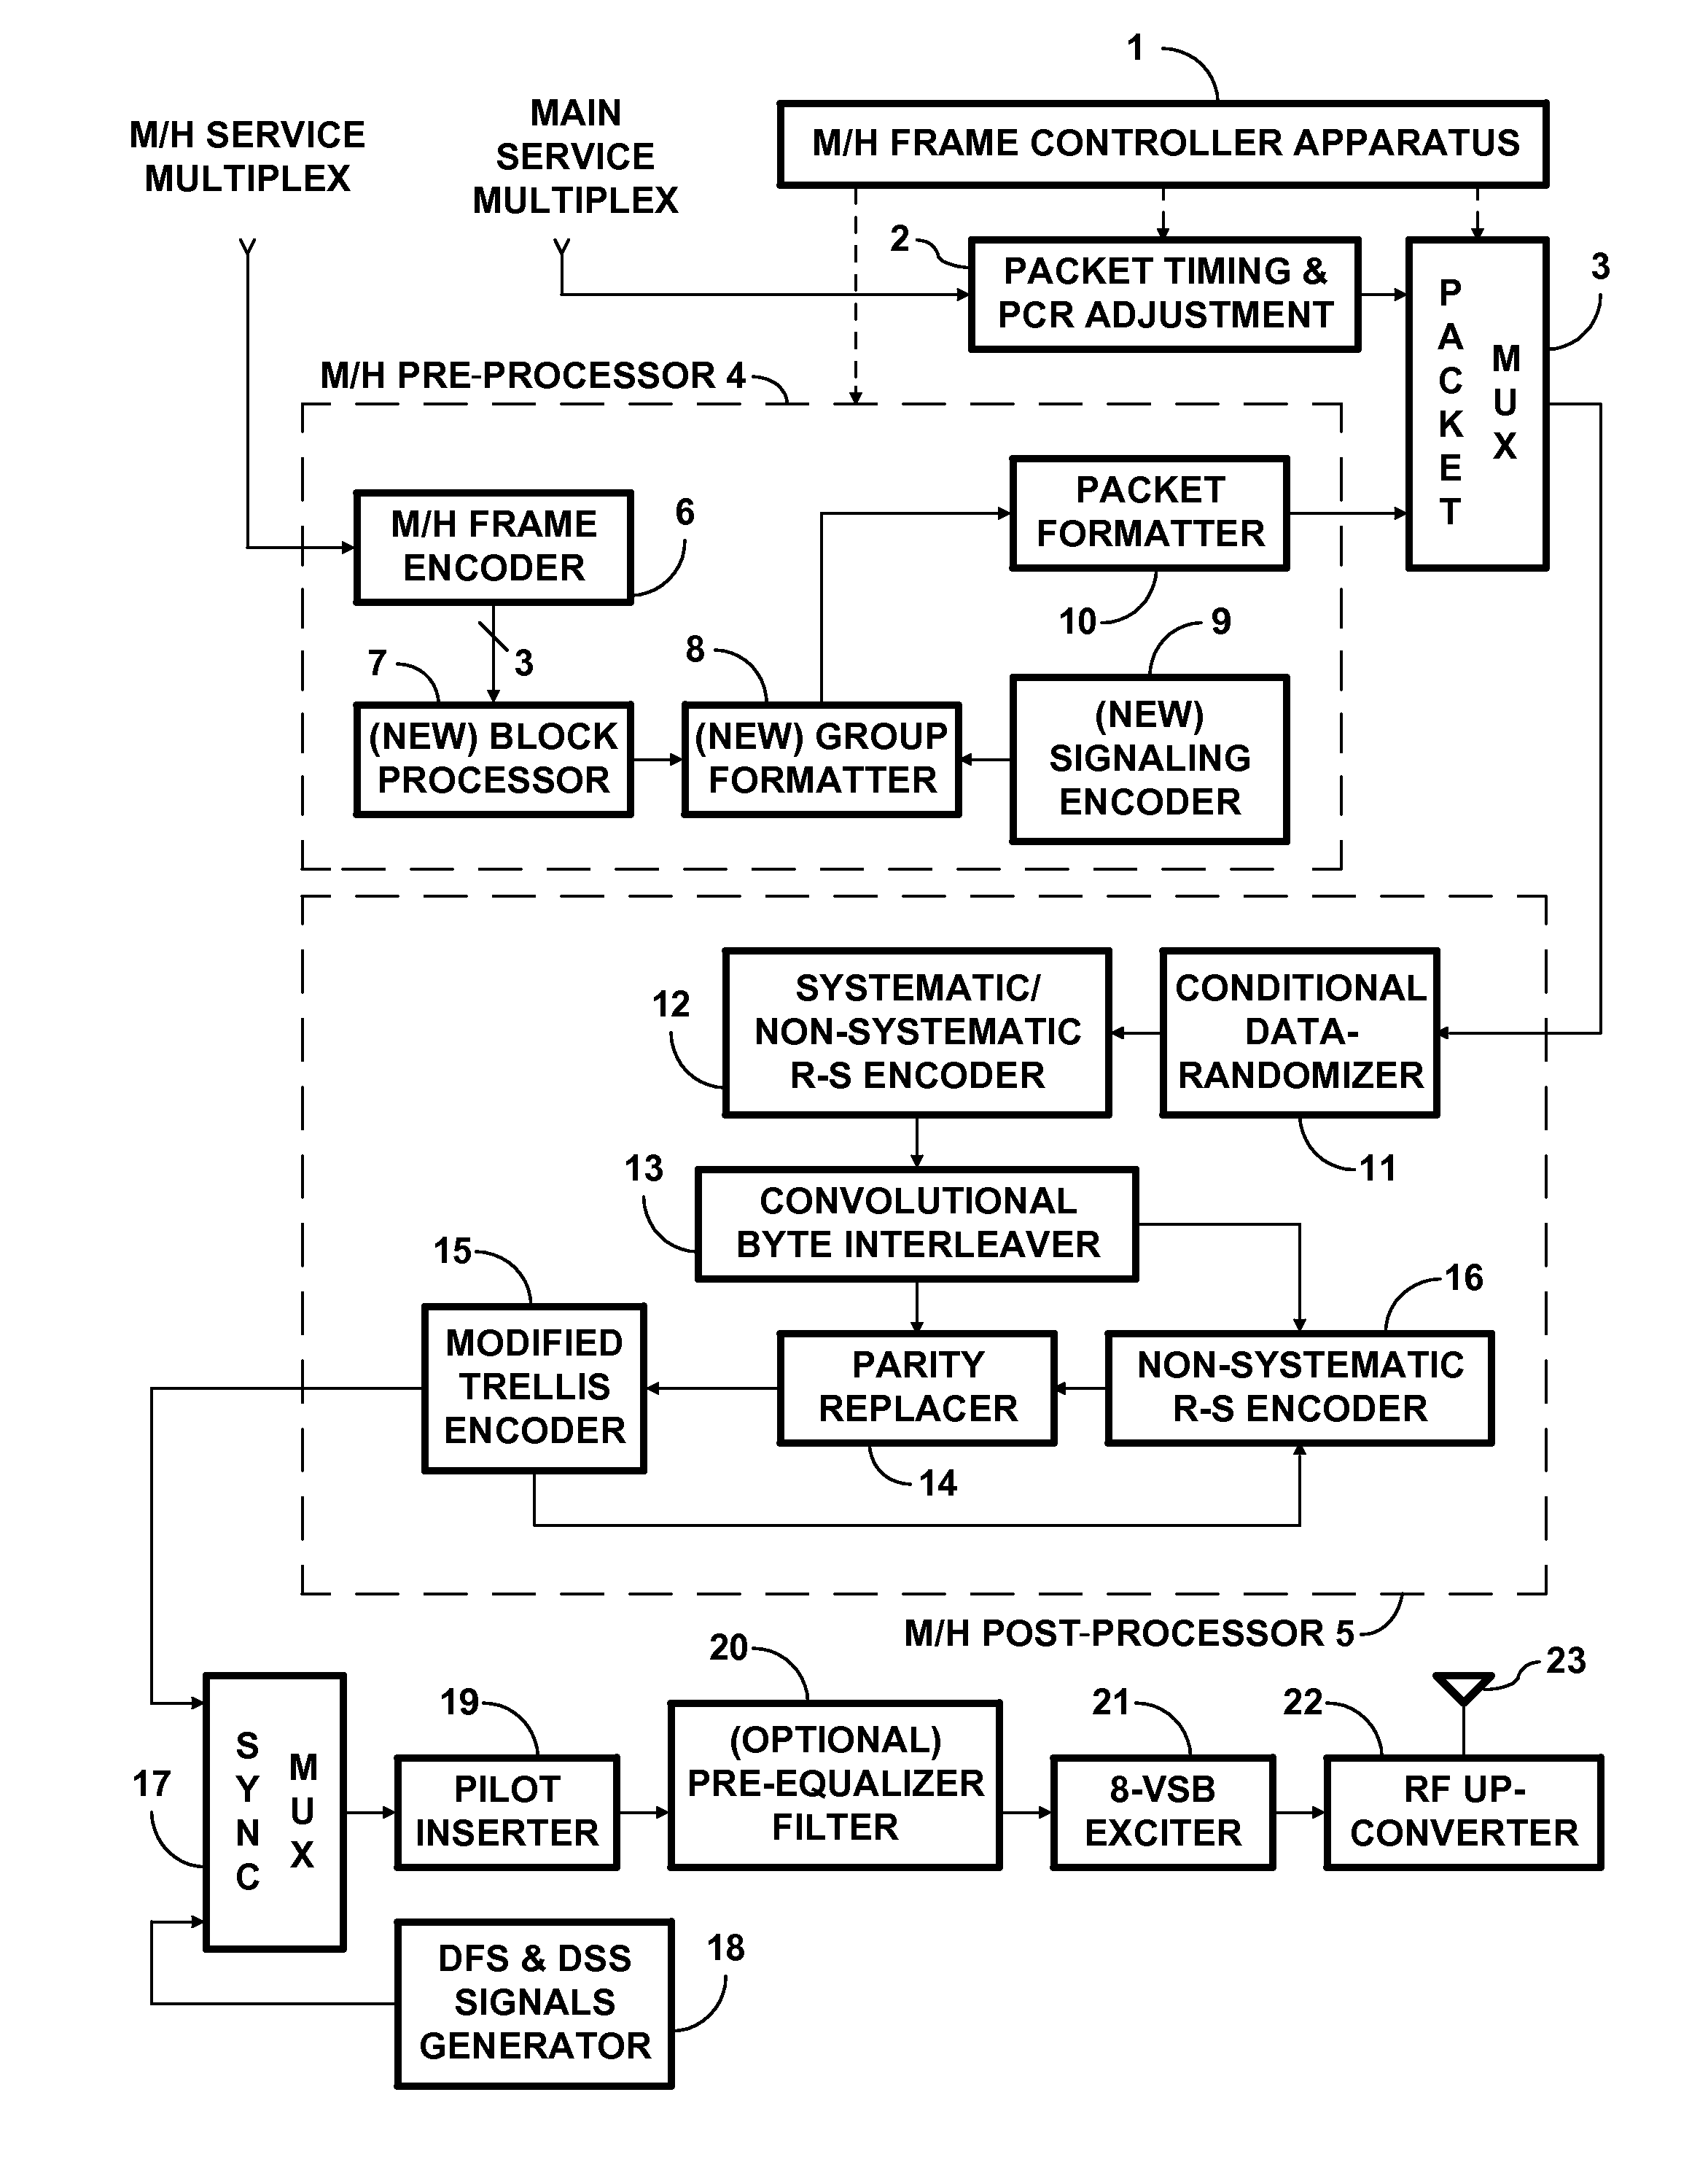 Digital television systems employing concatenated convolutional coded data